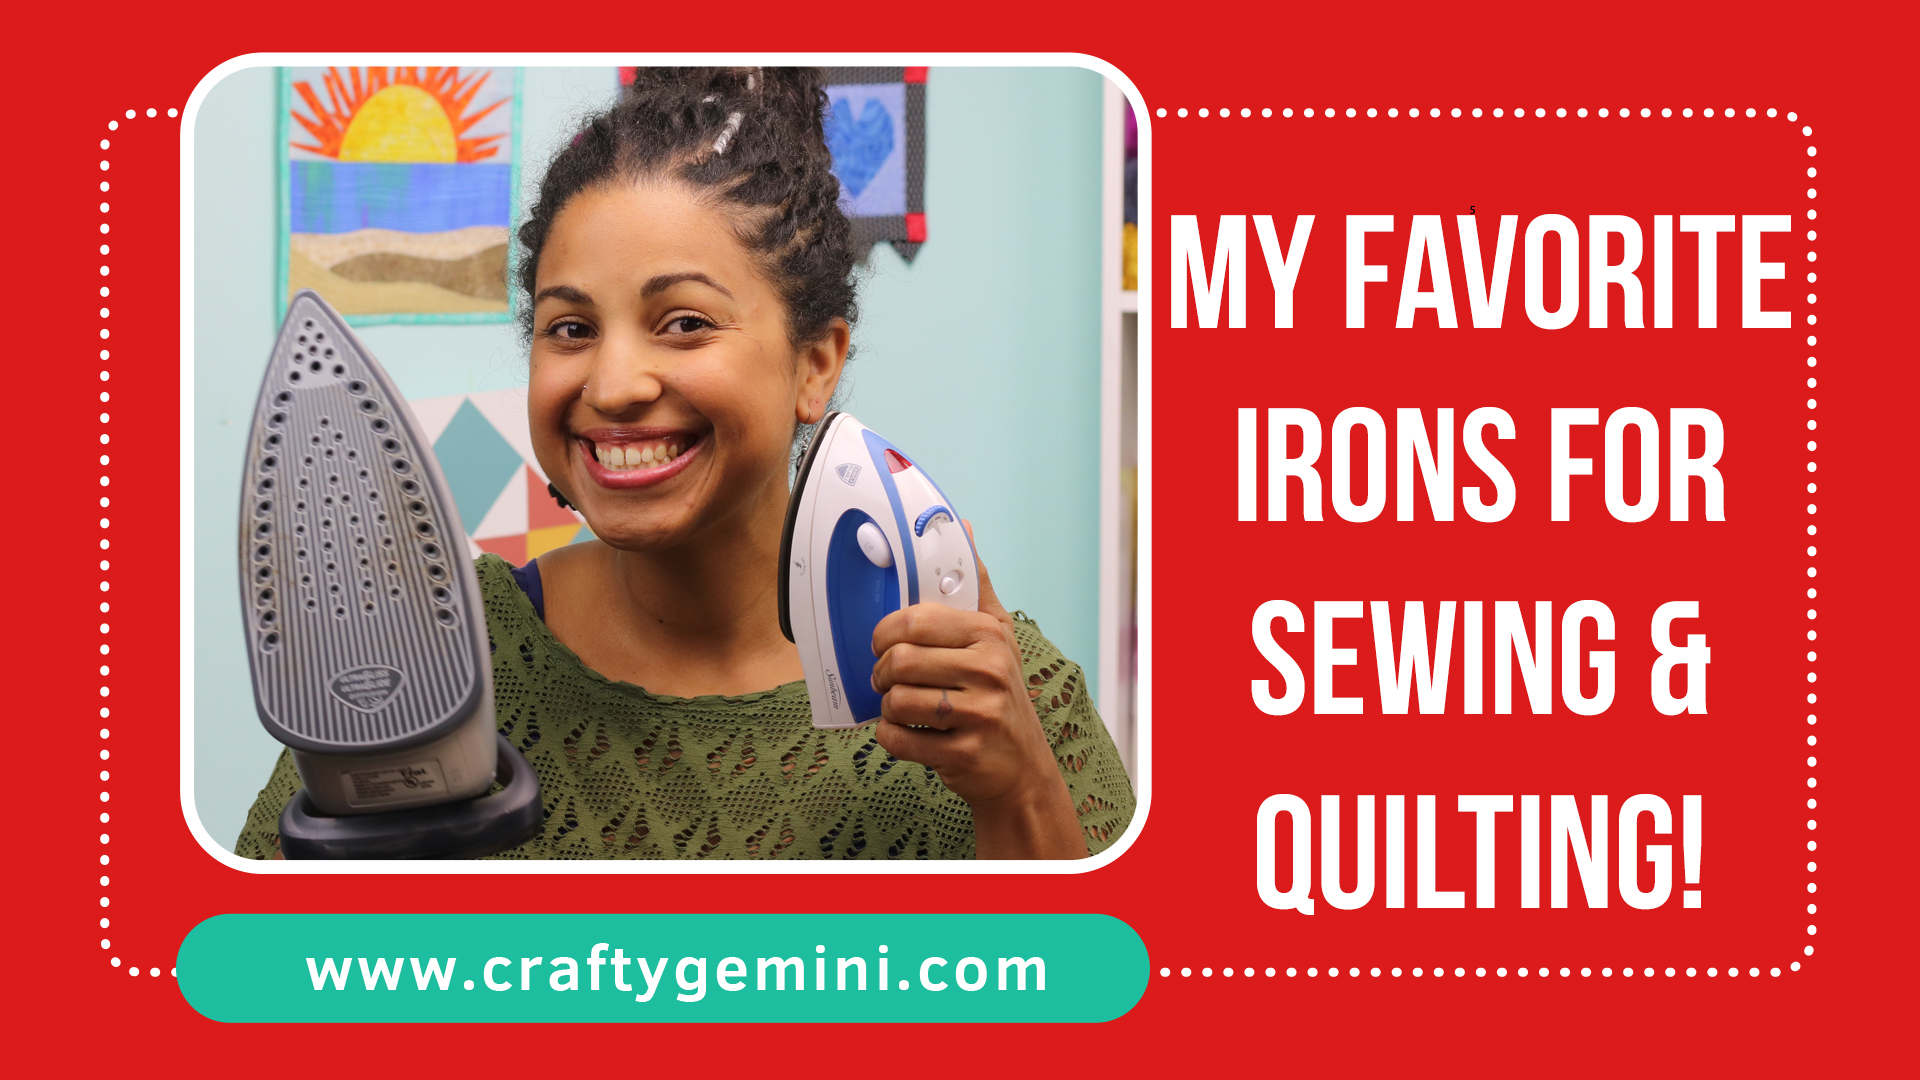 A video review of <a class='bp-suggestions-mention' href='https://craftygemini.com/members/craftygemini/' rel='nofollow'></noscript>@CraftyGemini</a>'s favorite irons to use for sewing & quilting projects.